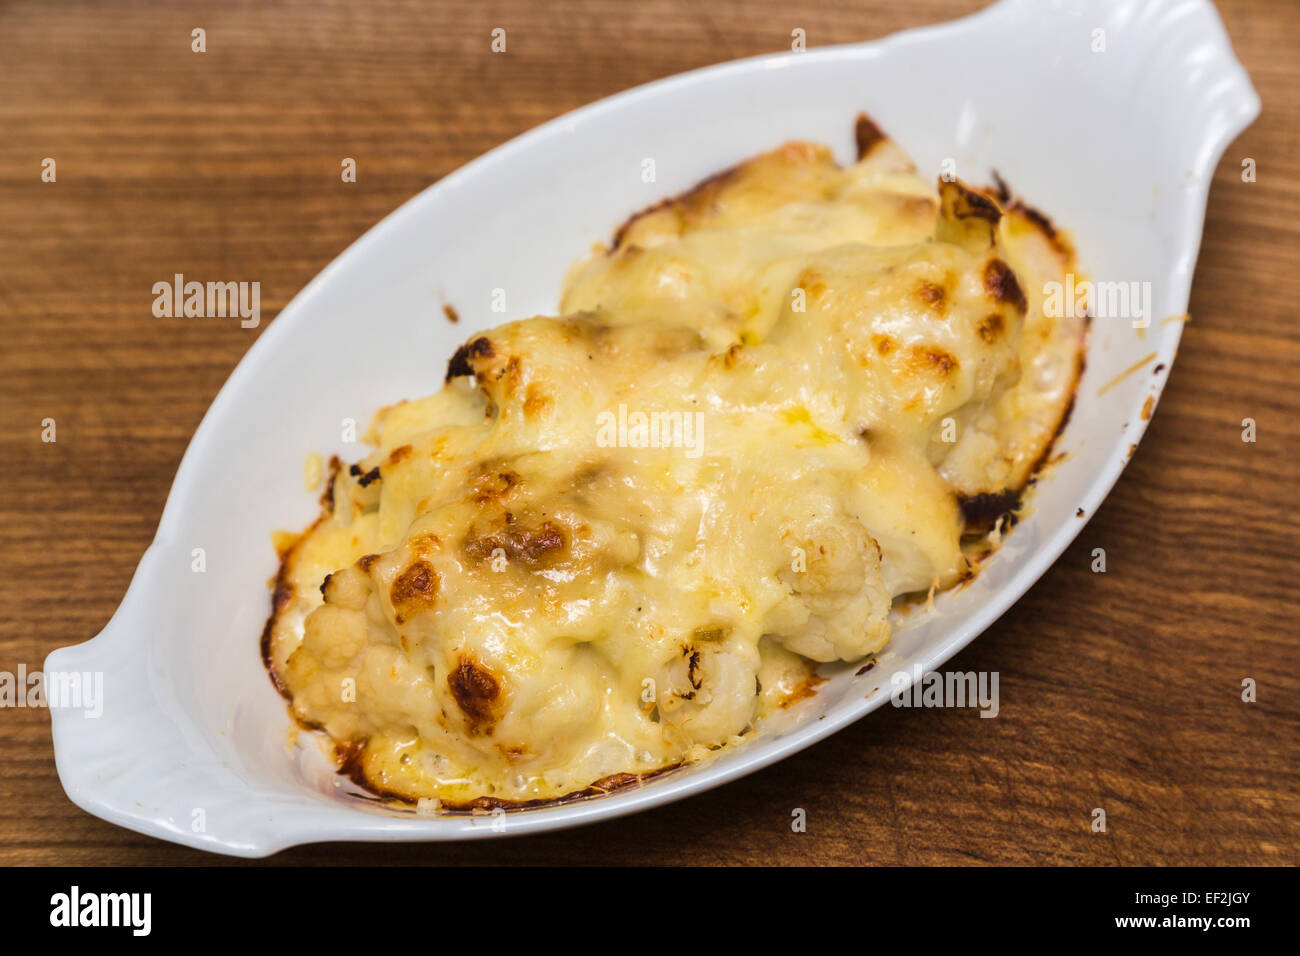 Plate of delicious home made baked cauliflower cheese served in an oval plain white china dish on a wooden board Stock Photo